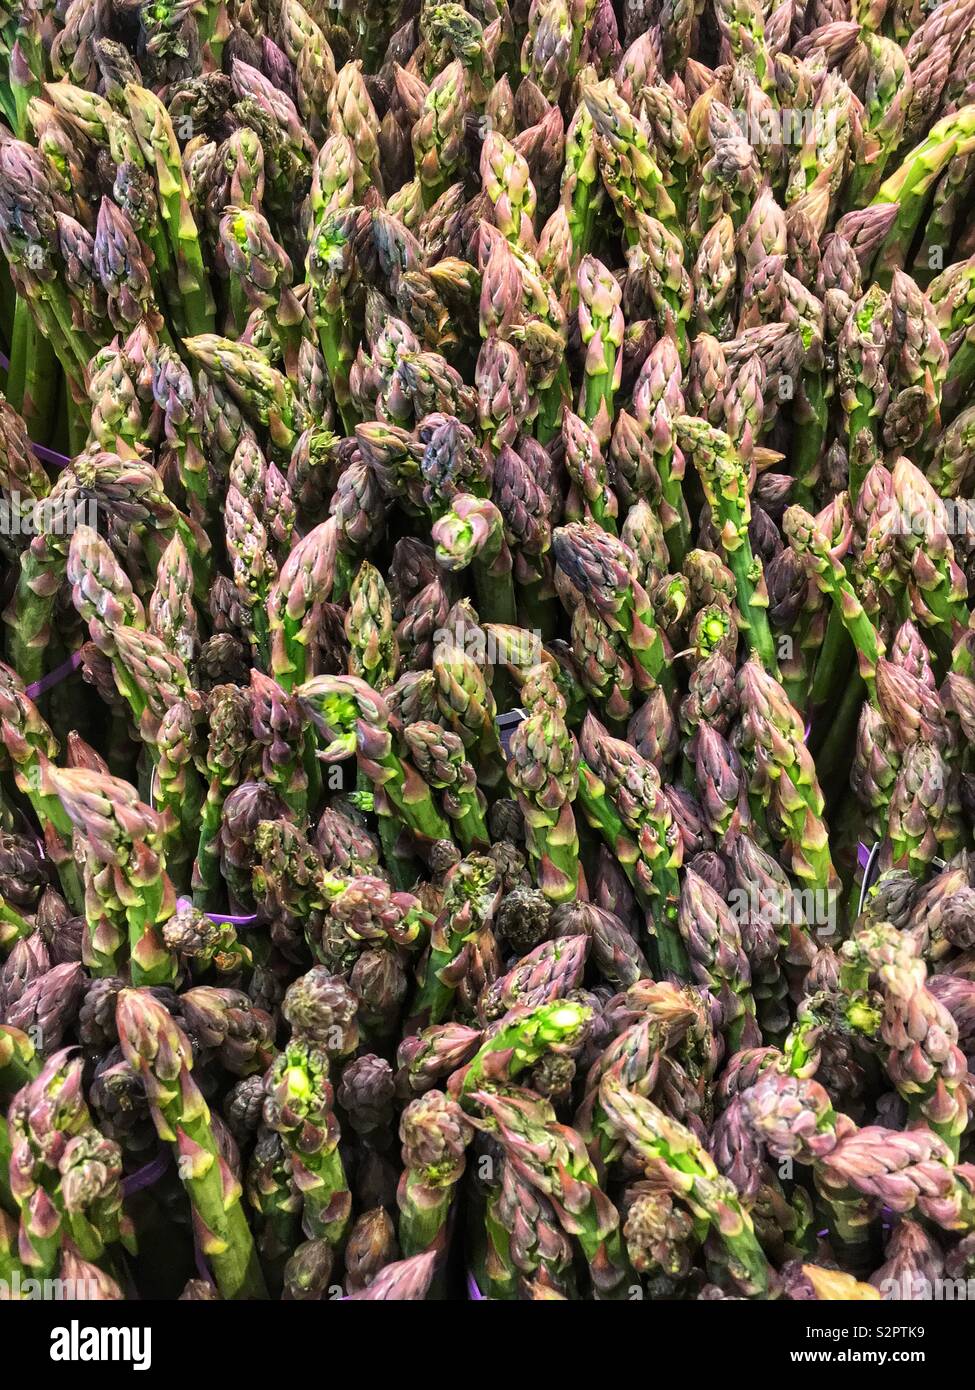 Forest of fresh asparagus tops. Stock Photo